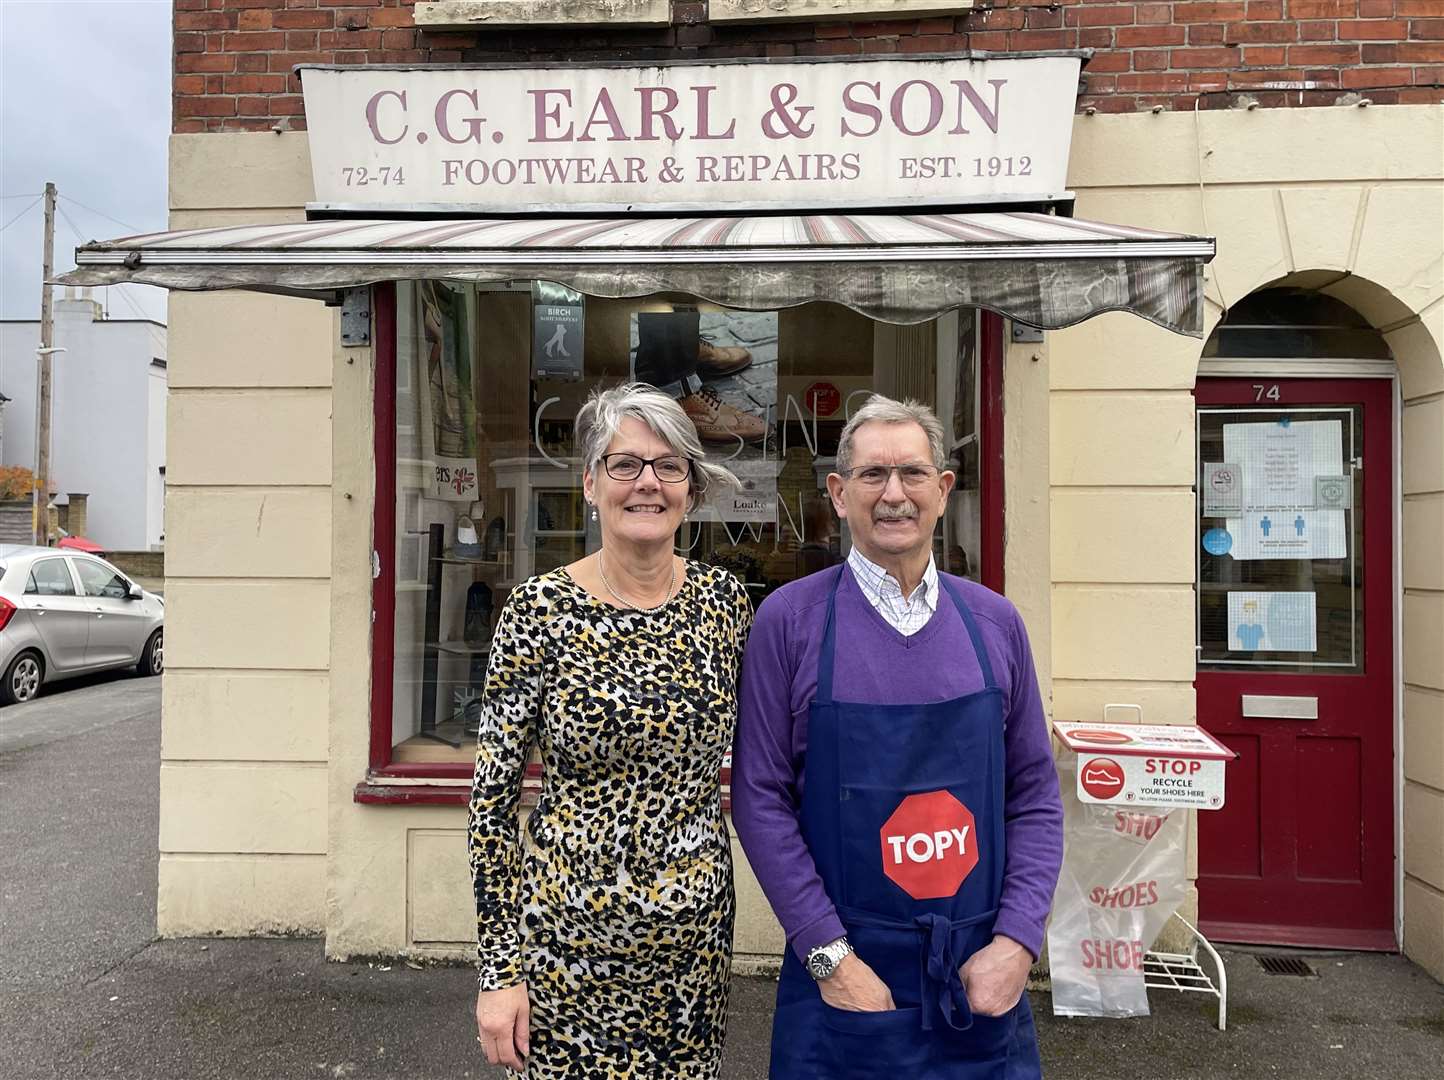 Peter and Angie Earl had planned to shut the shop before Christmas